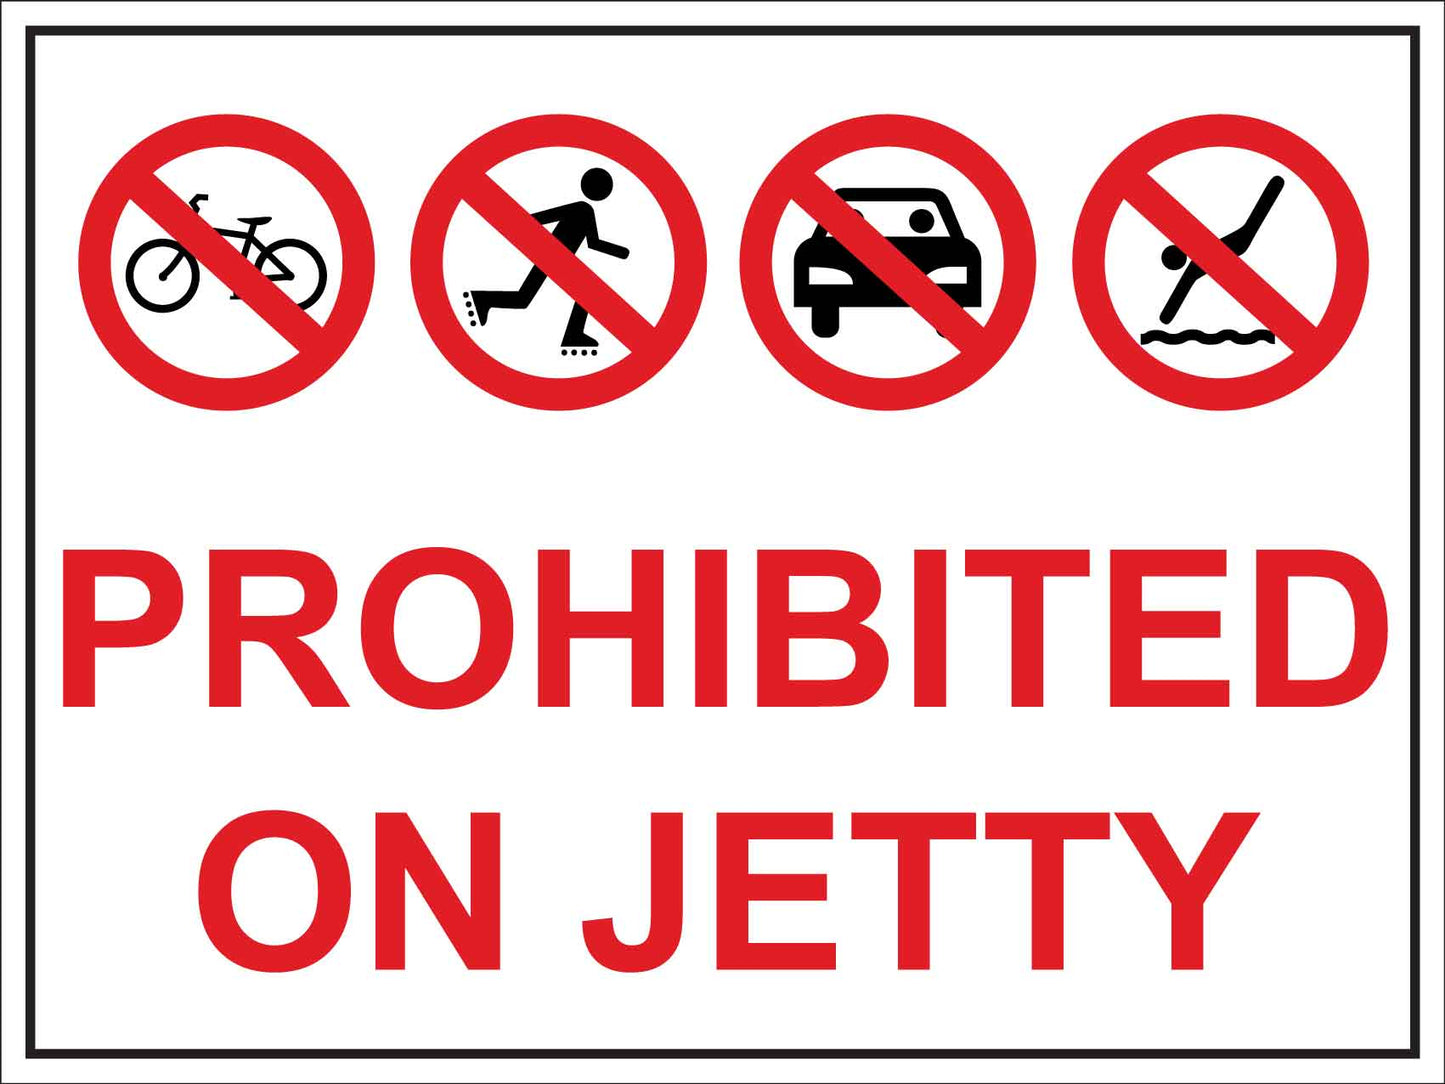 Prohibited on Jetty Sign